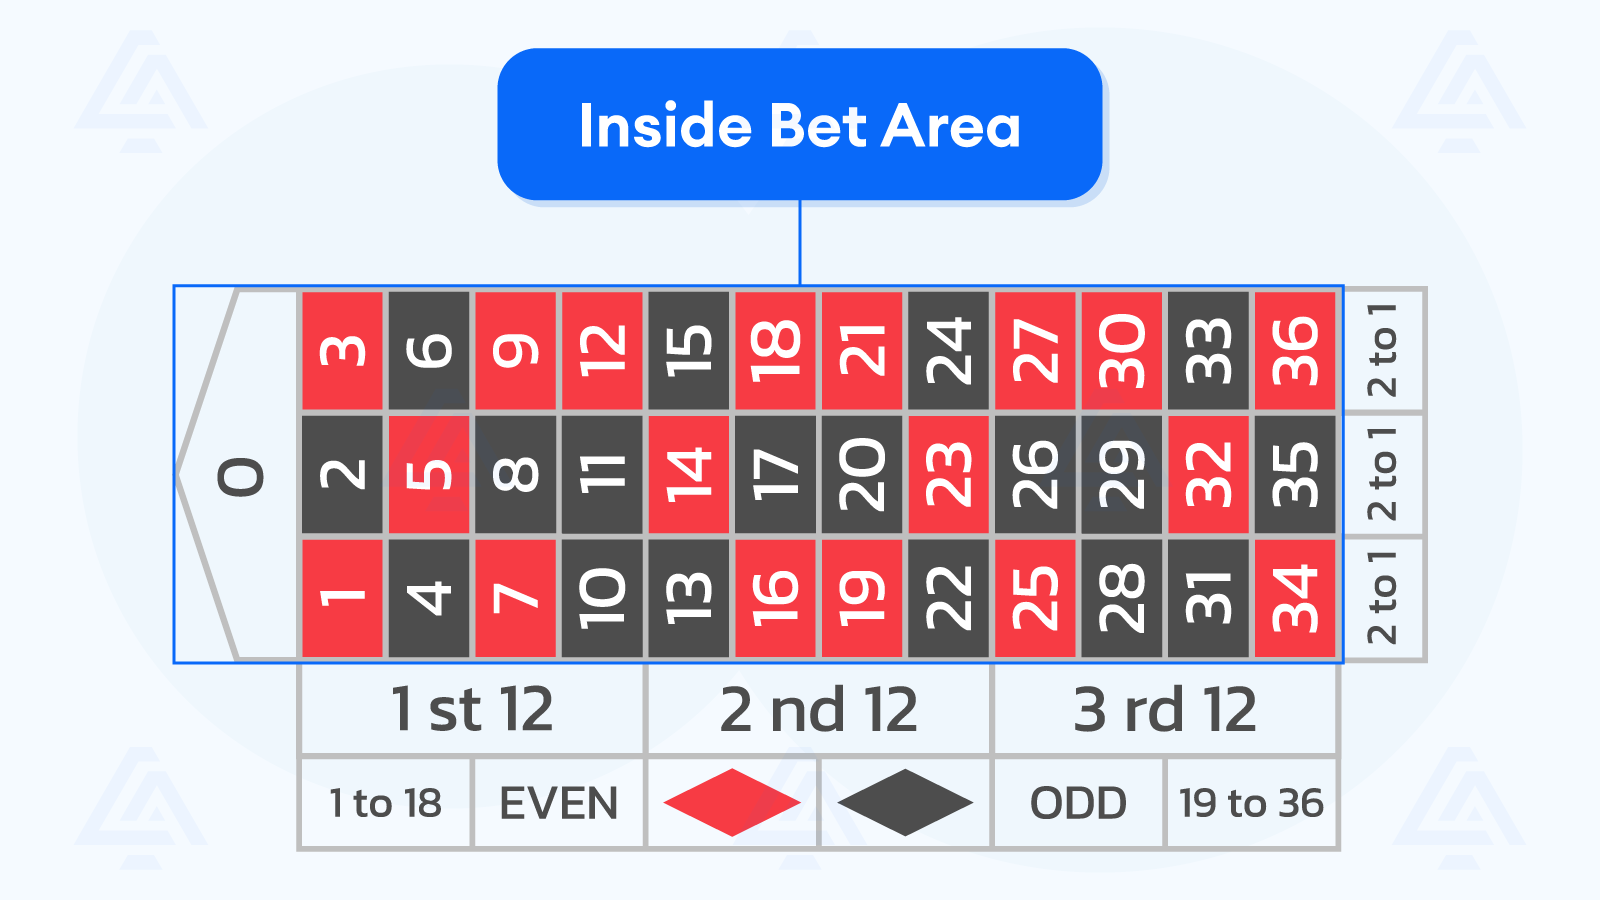 Inside Bet Area on the Table